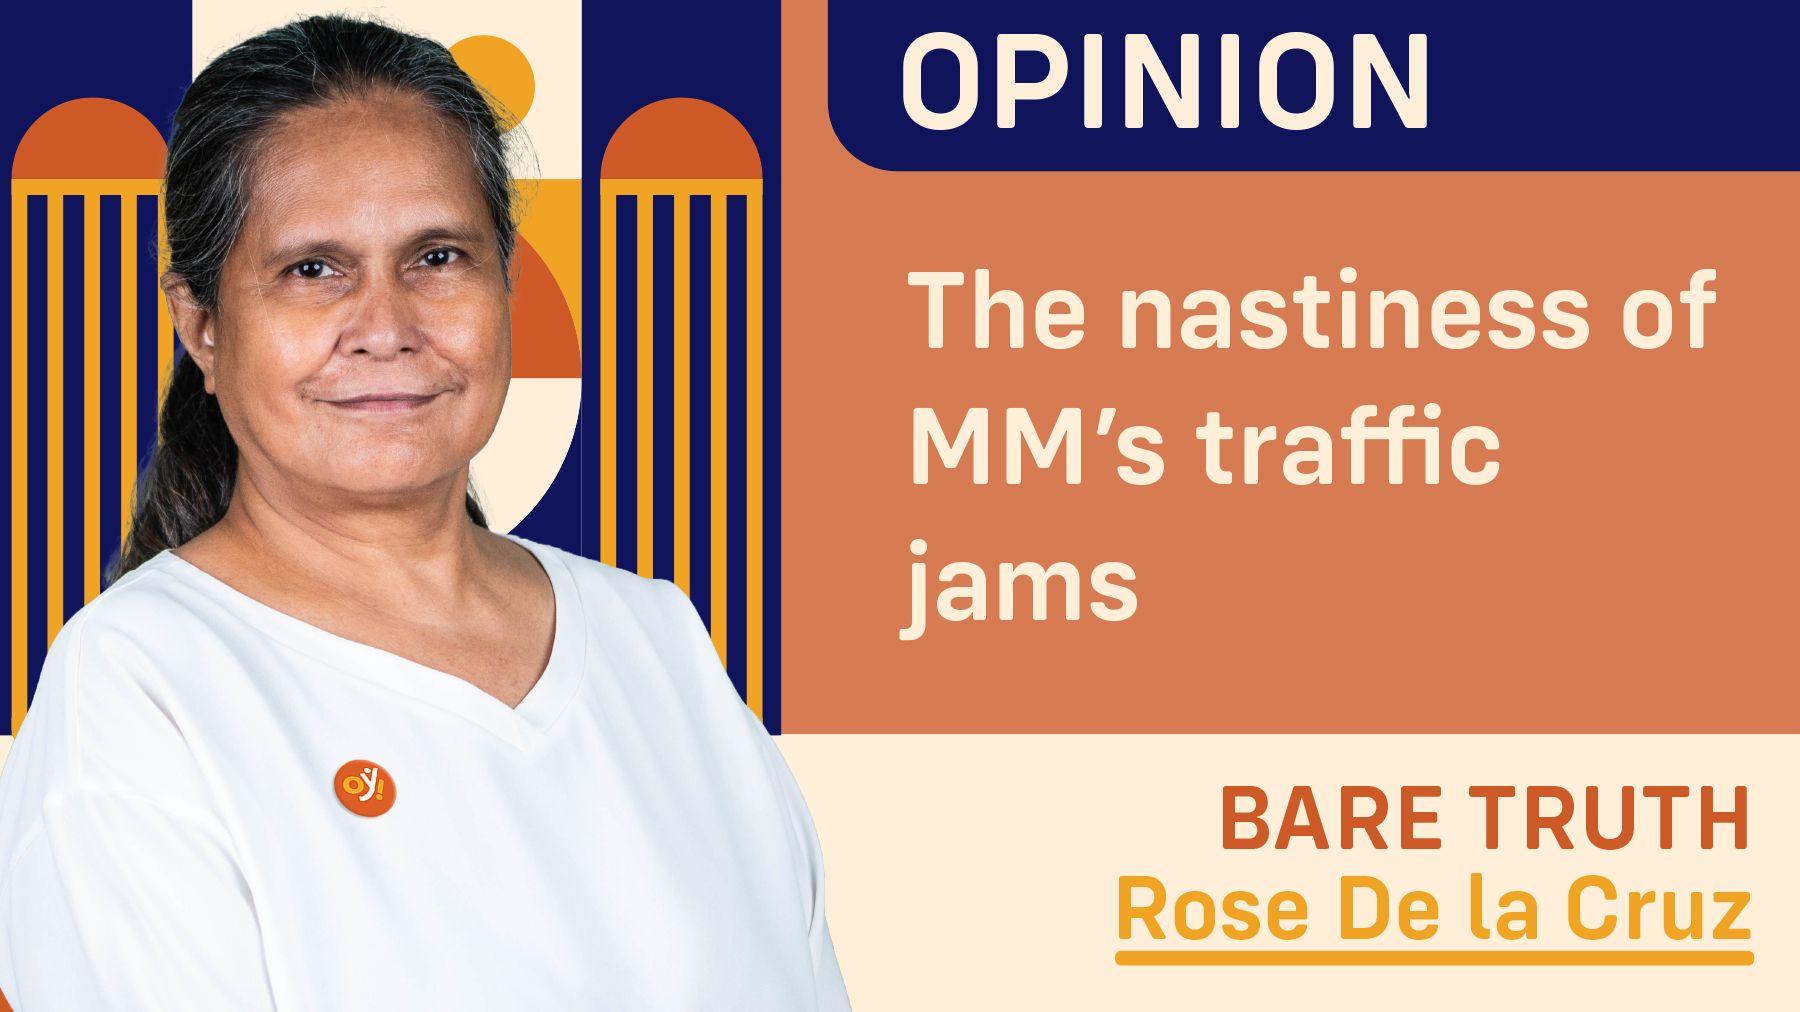 The nastiness of MM’s traffic jams